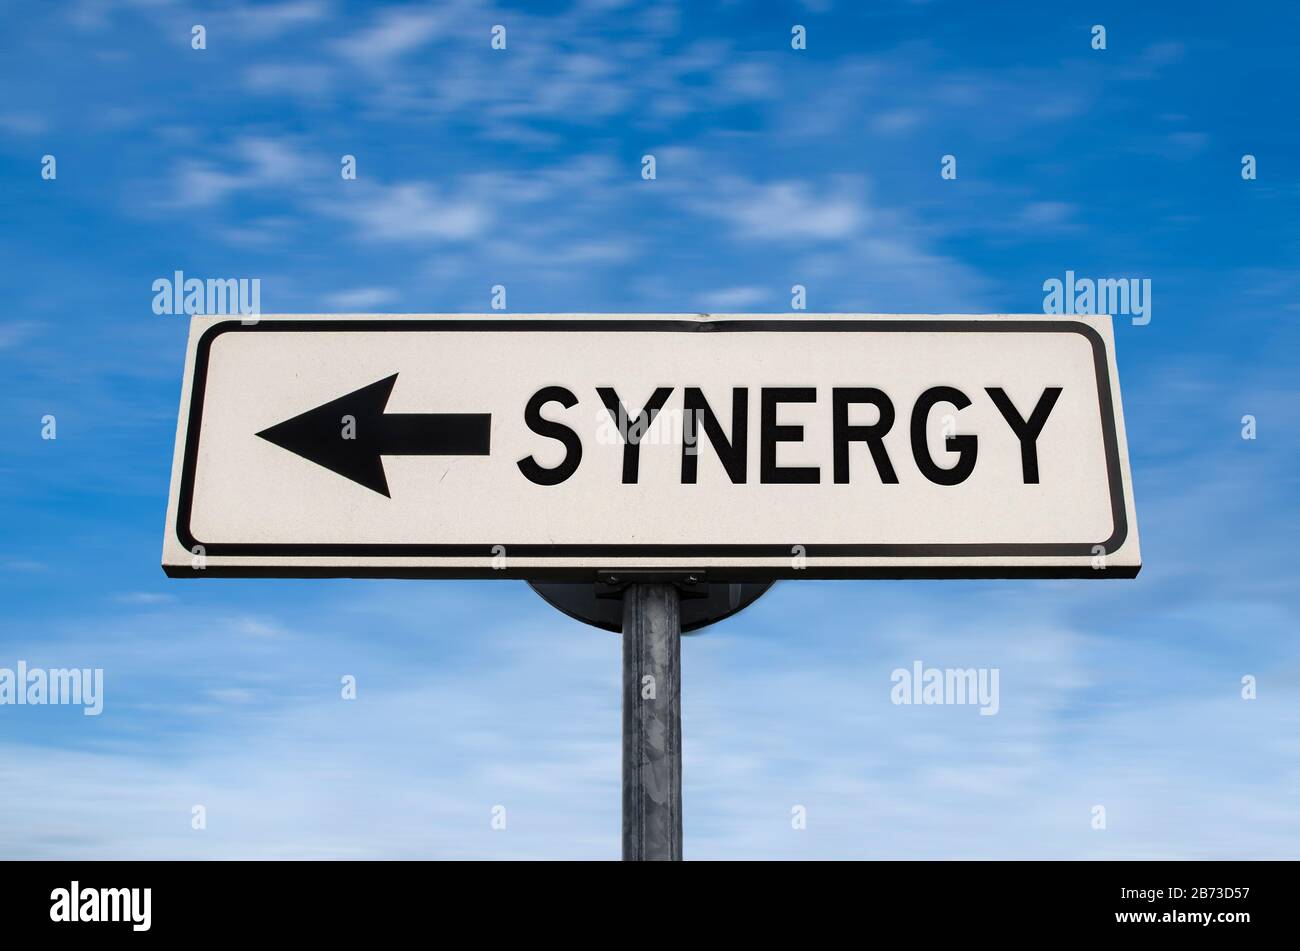 Synergy road sign, arrow on blue sky background. One way blank road sign with copy space. Arrow on a pole pointing in one direction. Stock Photo